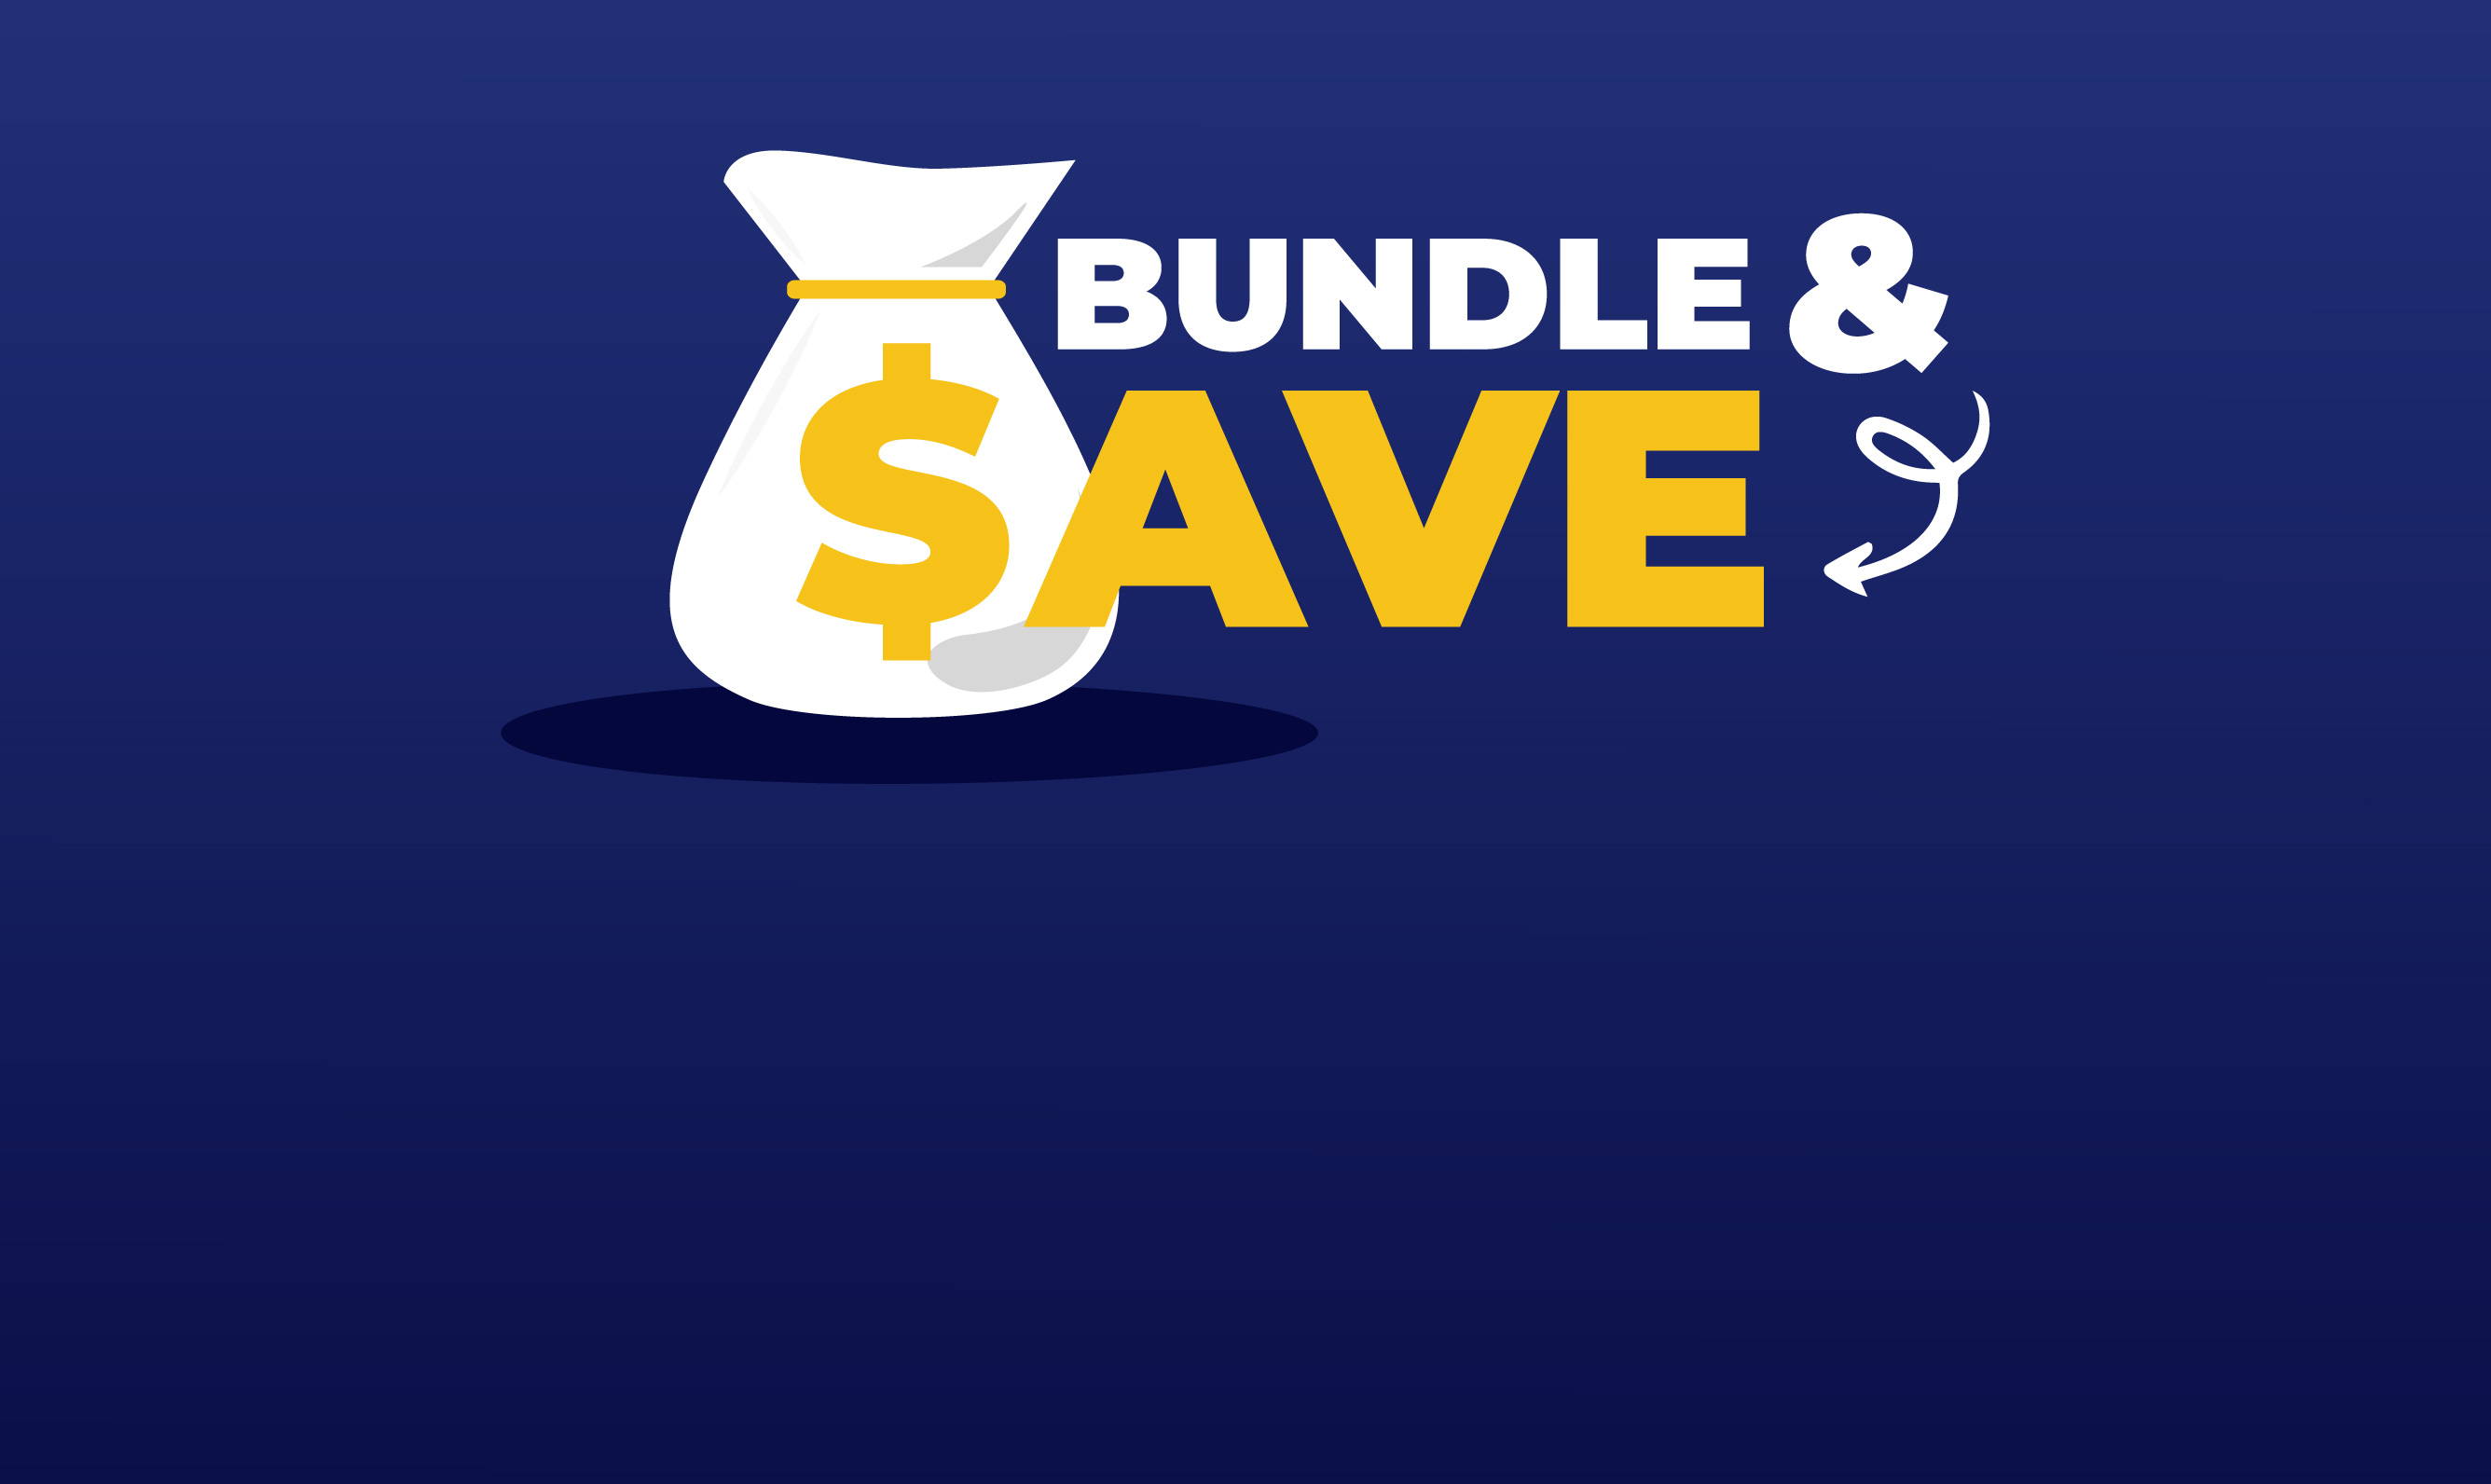 Bundle and Save! Explore our bundled packages and save when you combine your purchases. Click "Shop Packages" to be directed to the packages page.